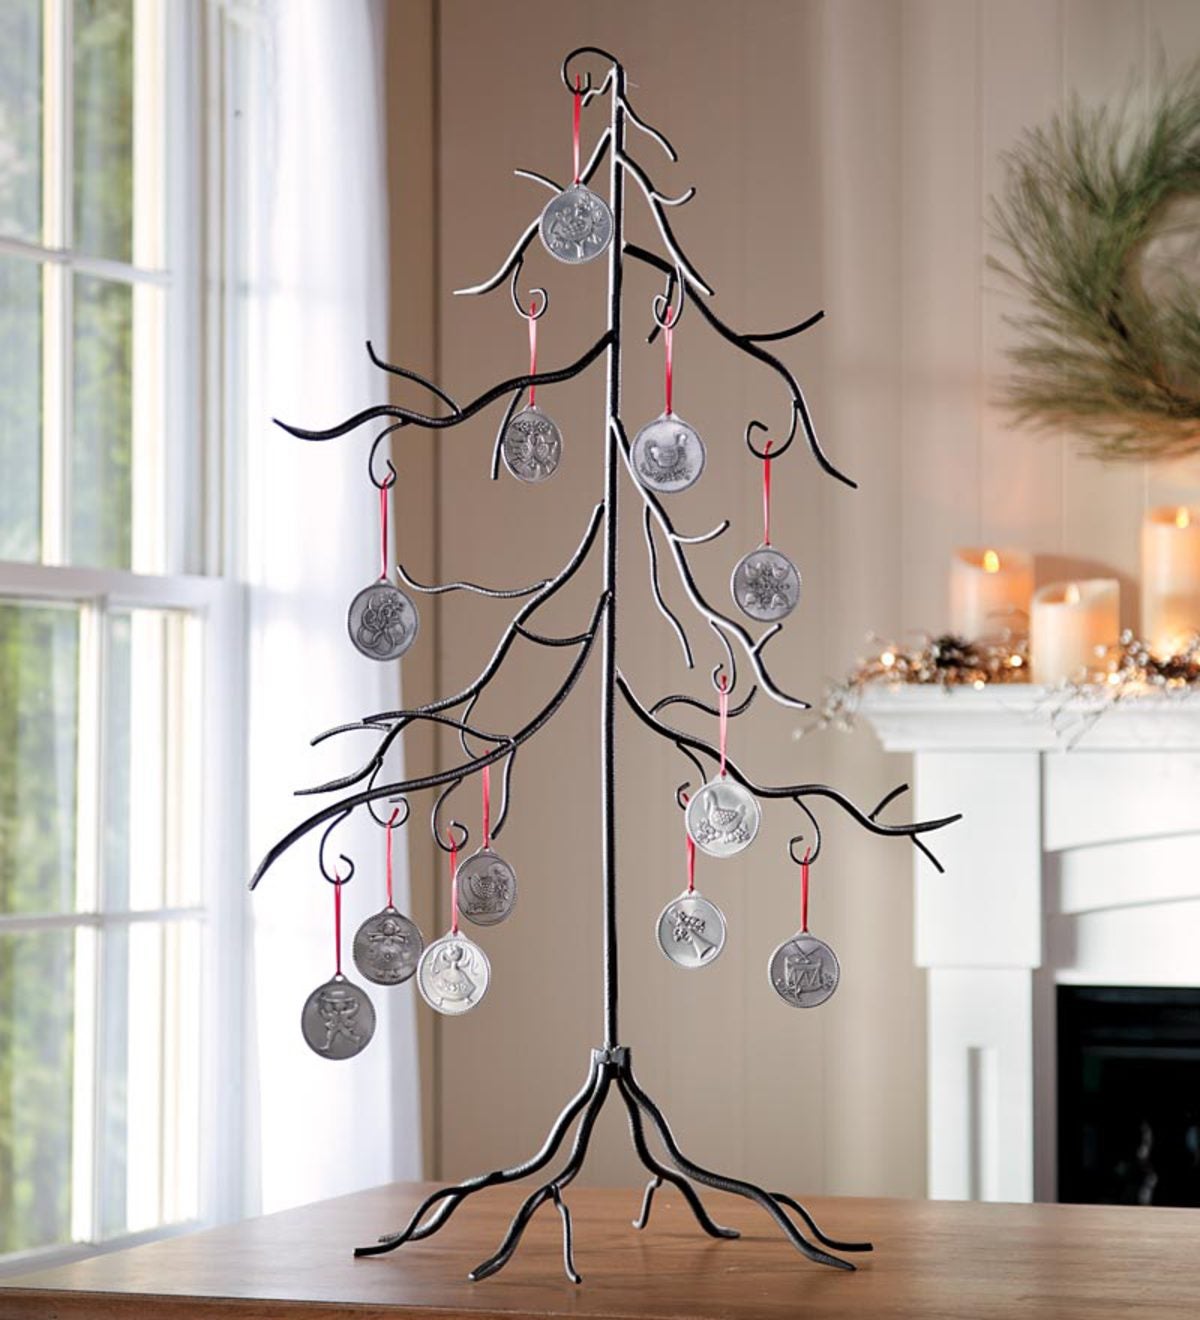 12 Days Of Christmas Pewter Ornaments And Ornament Tree Set | Plow & Hearth